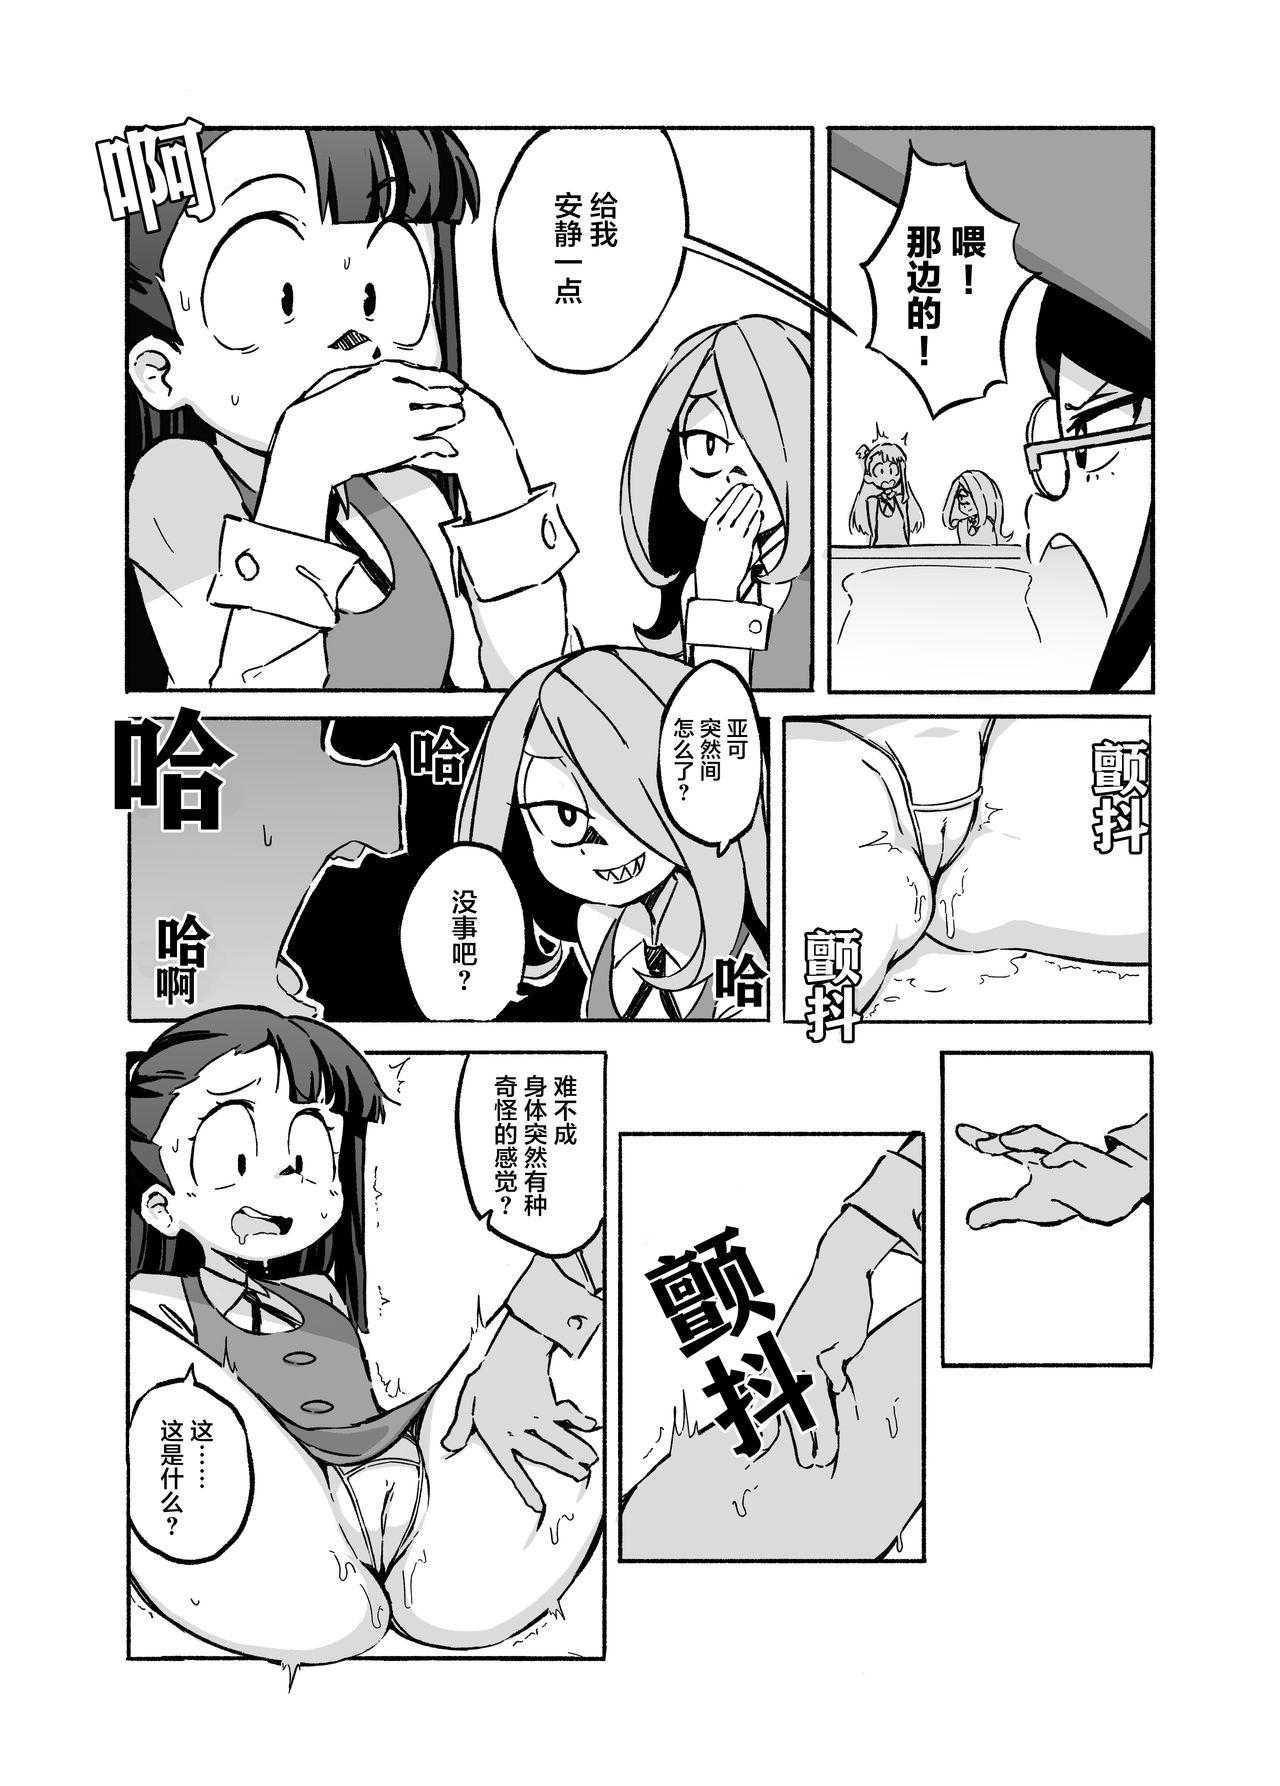 Bang Bros Mushroom Fever - Little witch academia Tied - Page 9